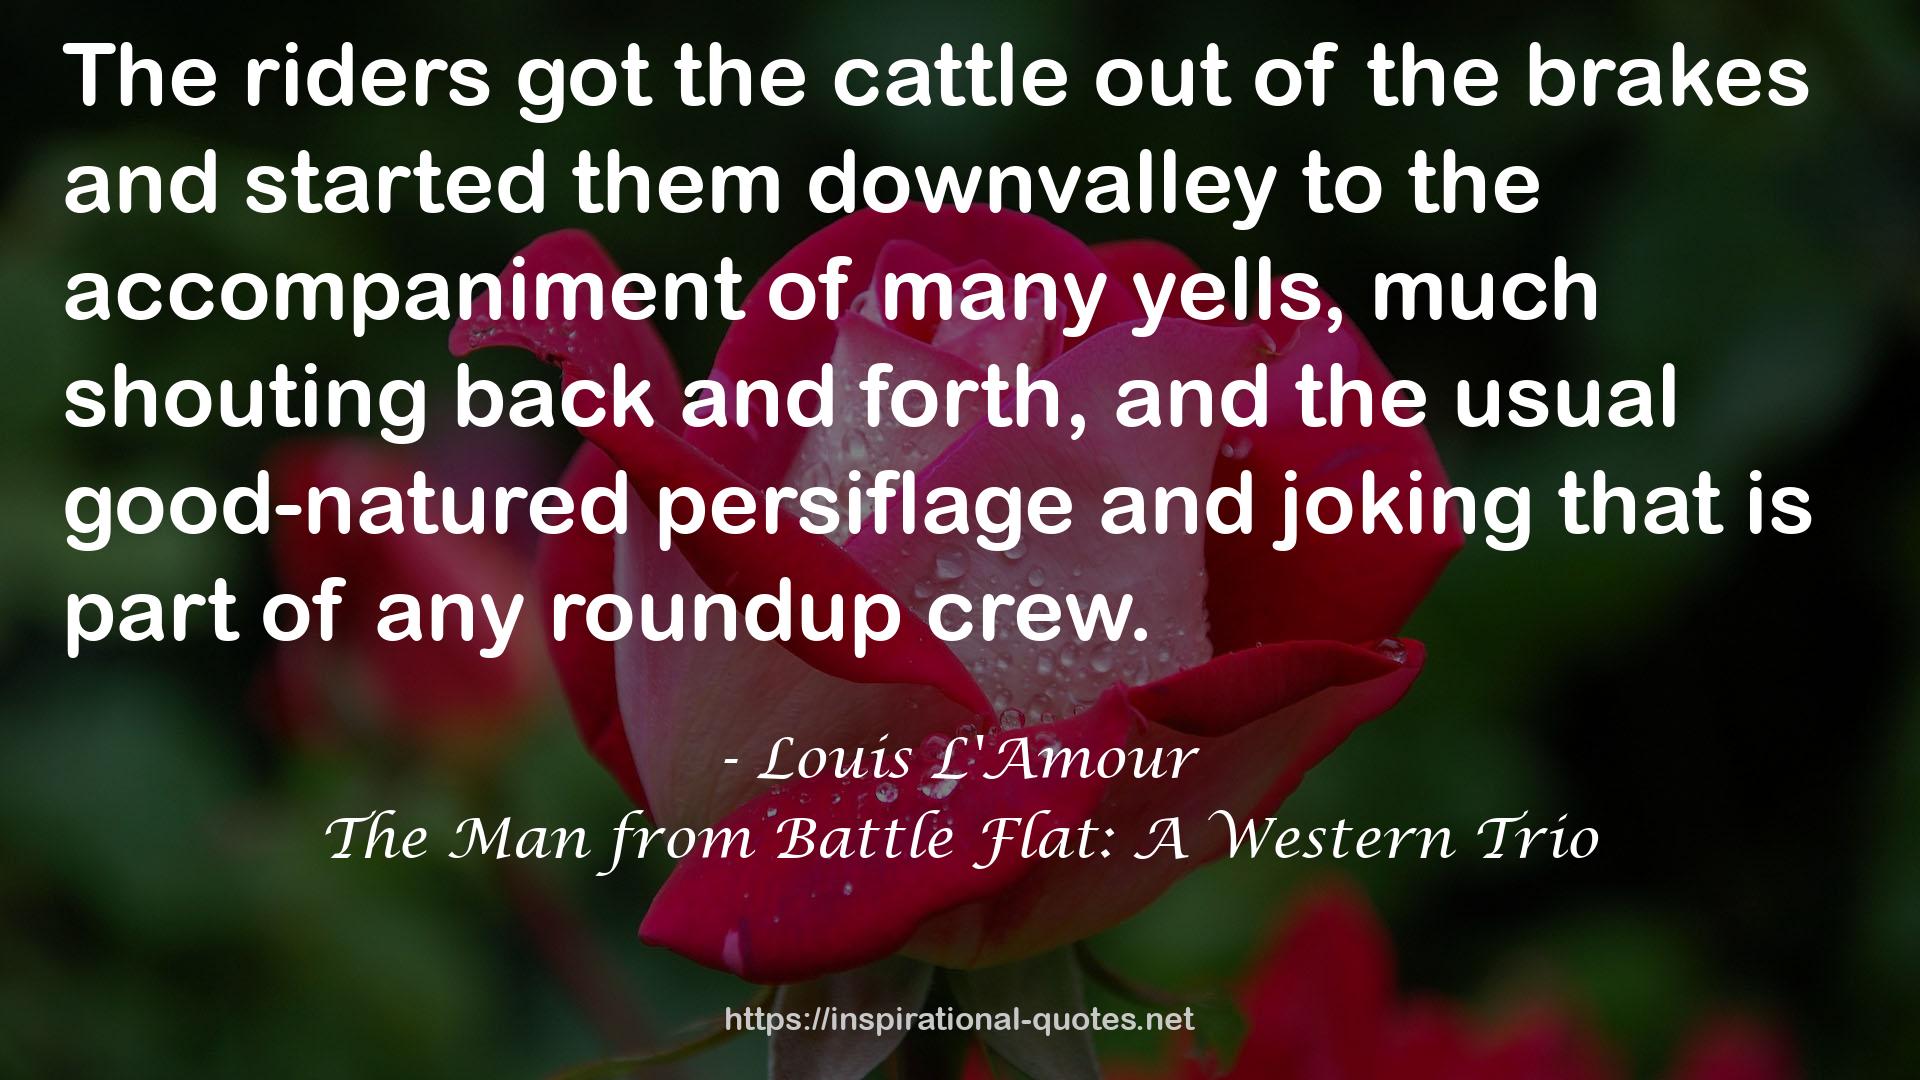 The Man from Battle Flat: A Western Trio QUOTES